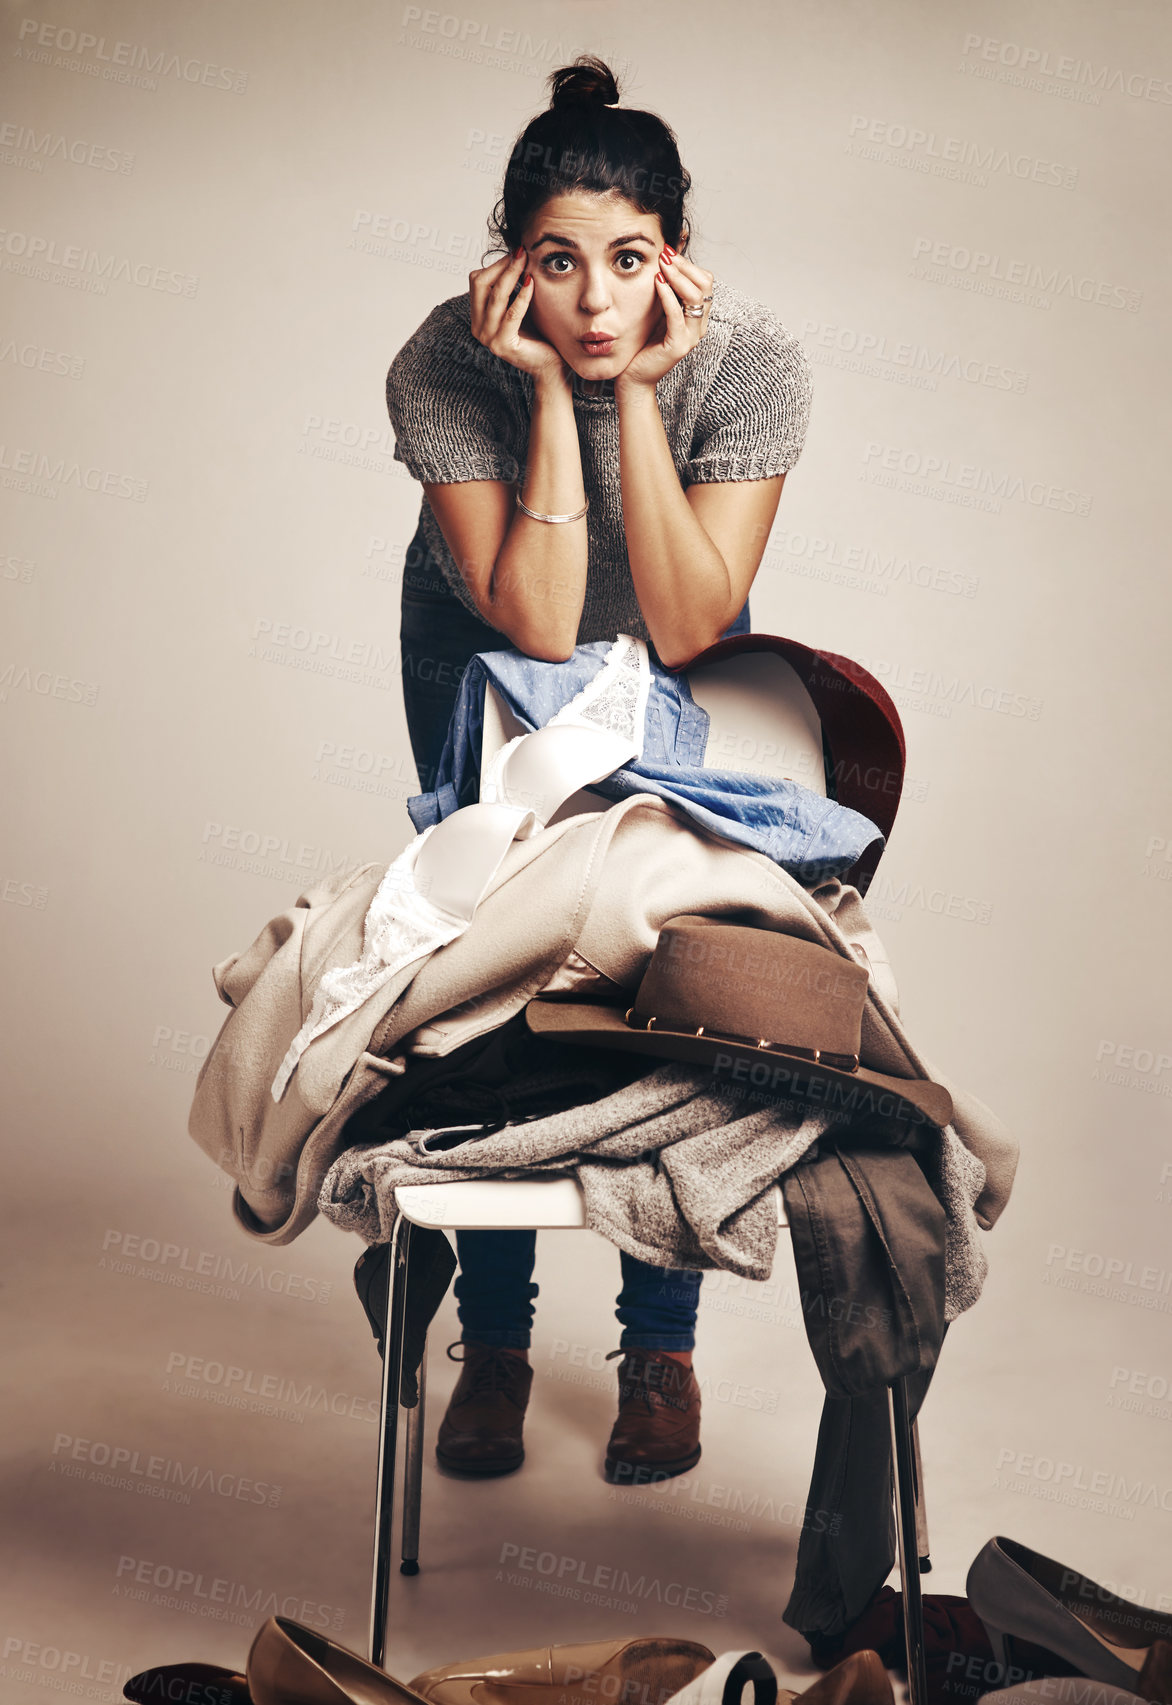 Buy stock photo Studio shot of a young woman choosing clothing piled on a chair against a brown background